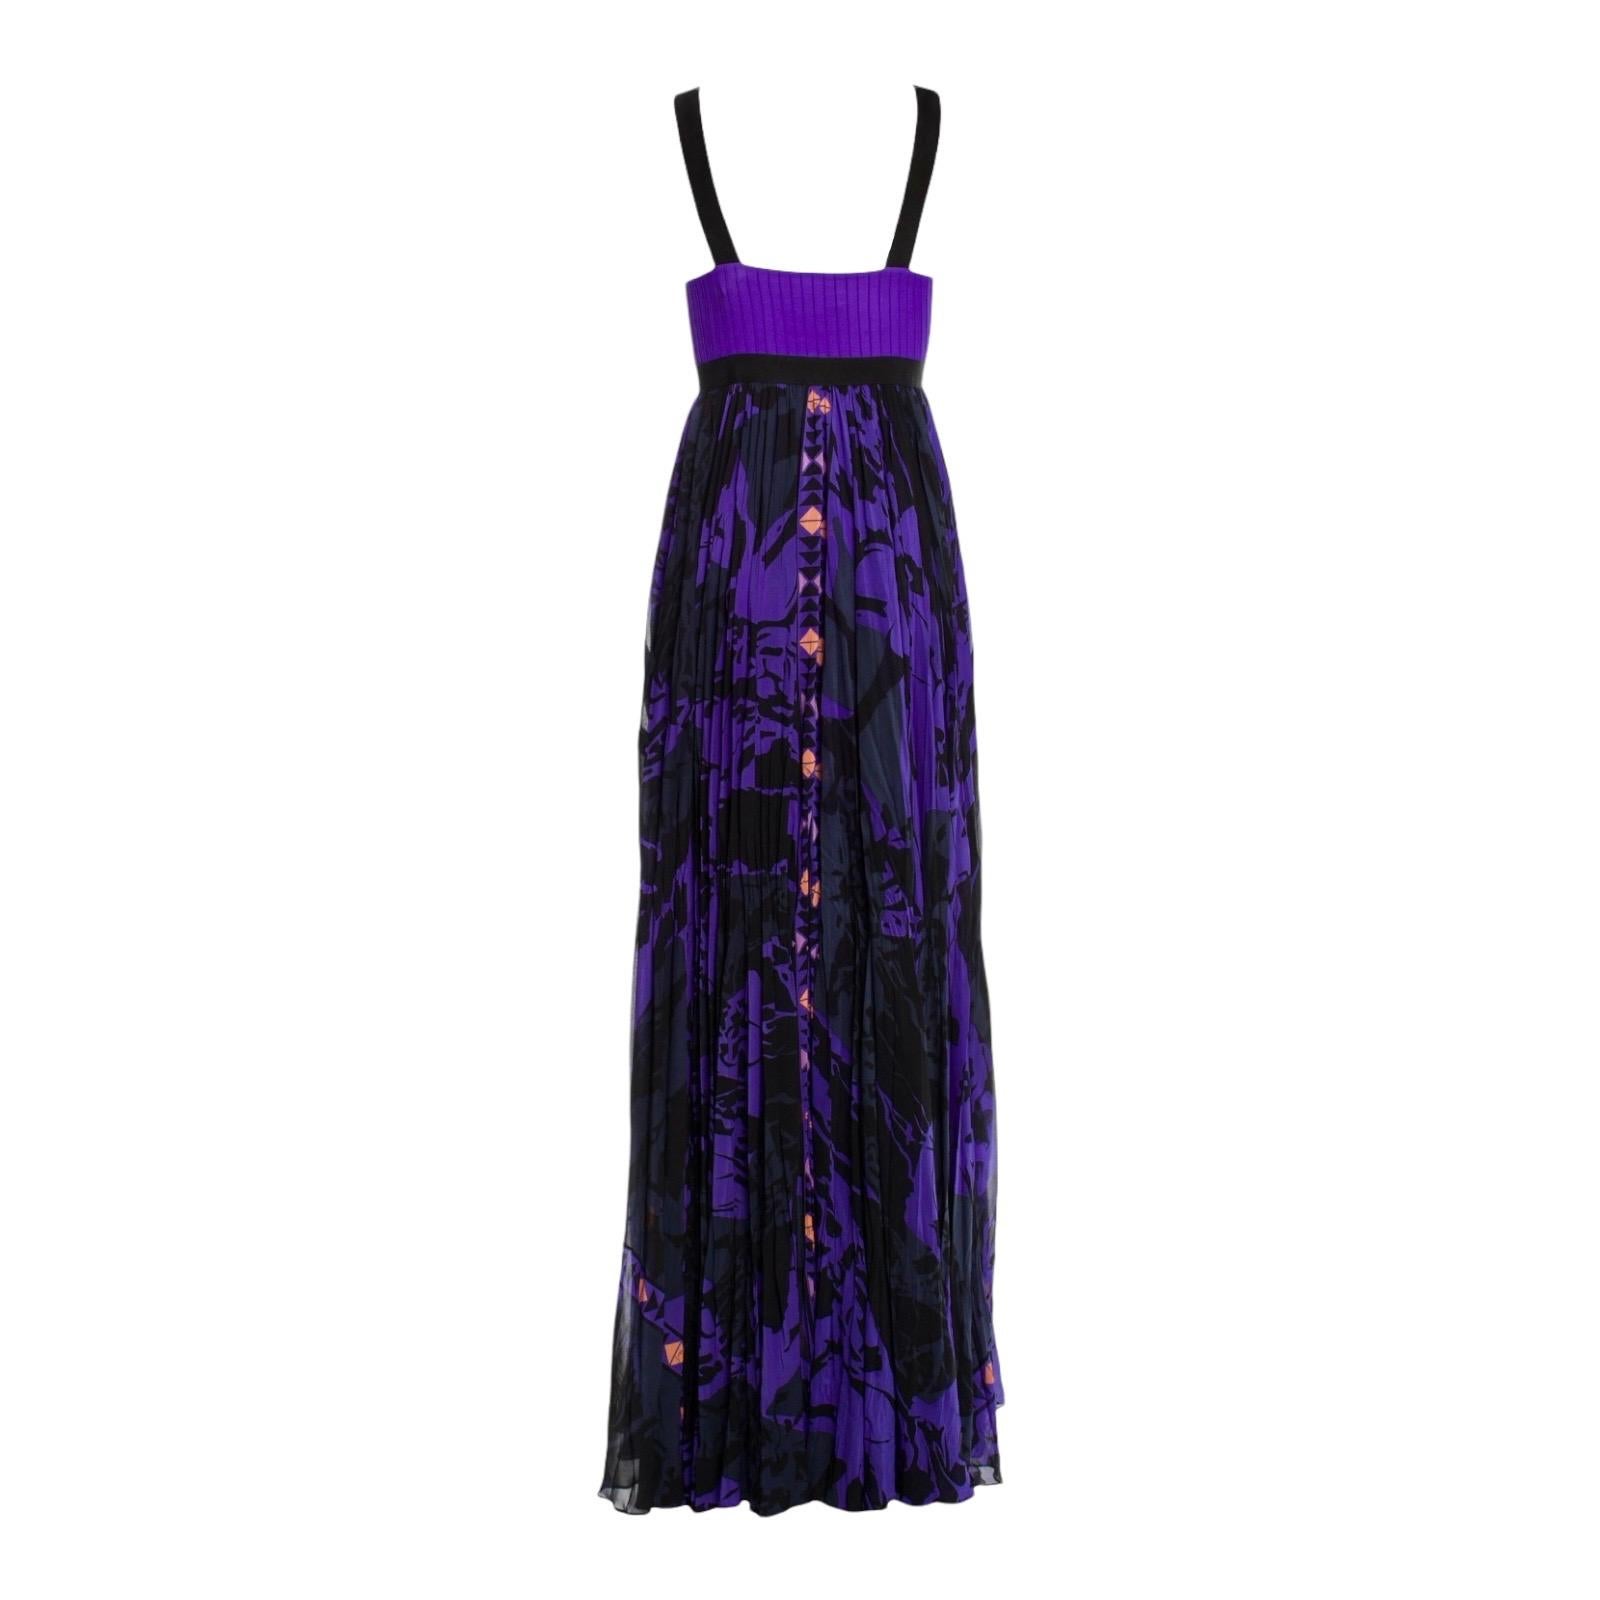 BEAUTIFUL FAMOUS EMILIO PUCCI MULTICOLOR PRING DRAPED MAXI GOWN DRESS

DETAILS:

Beautiful purple & multicolored silk in the famous PUCCI signature print
Printed fabric signed discreetly with 